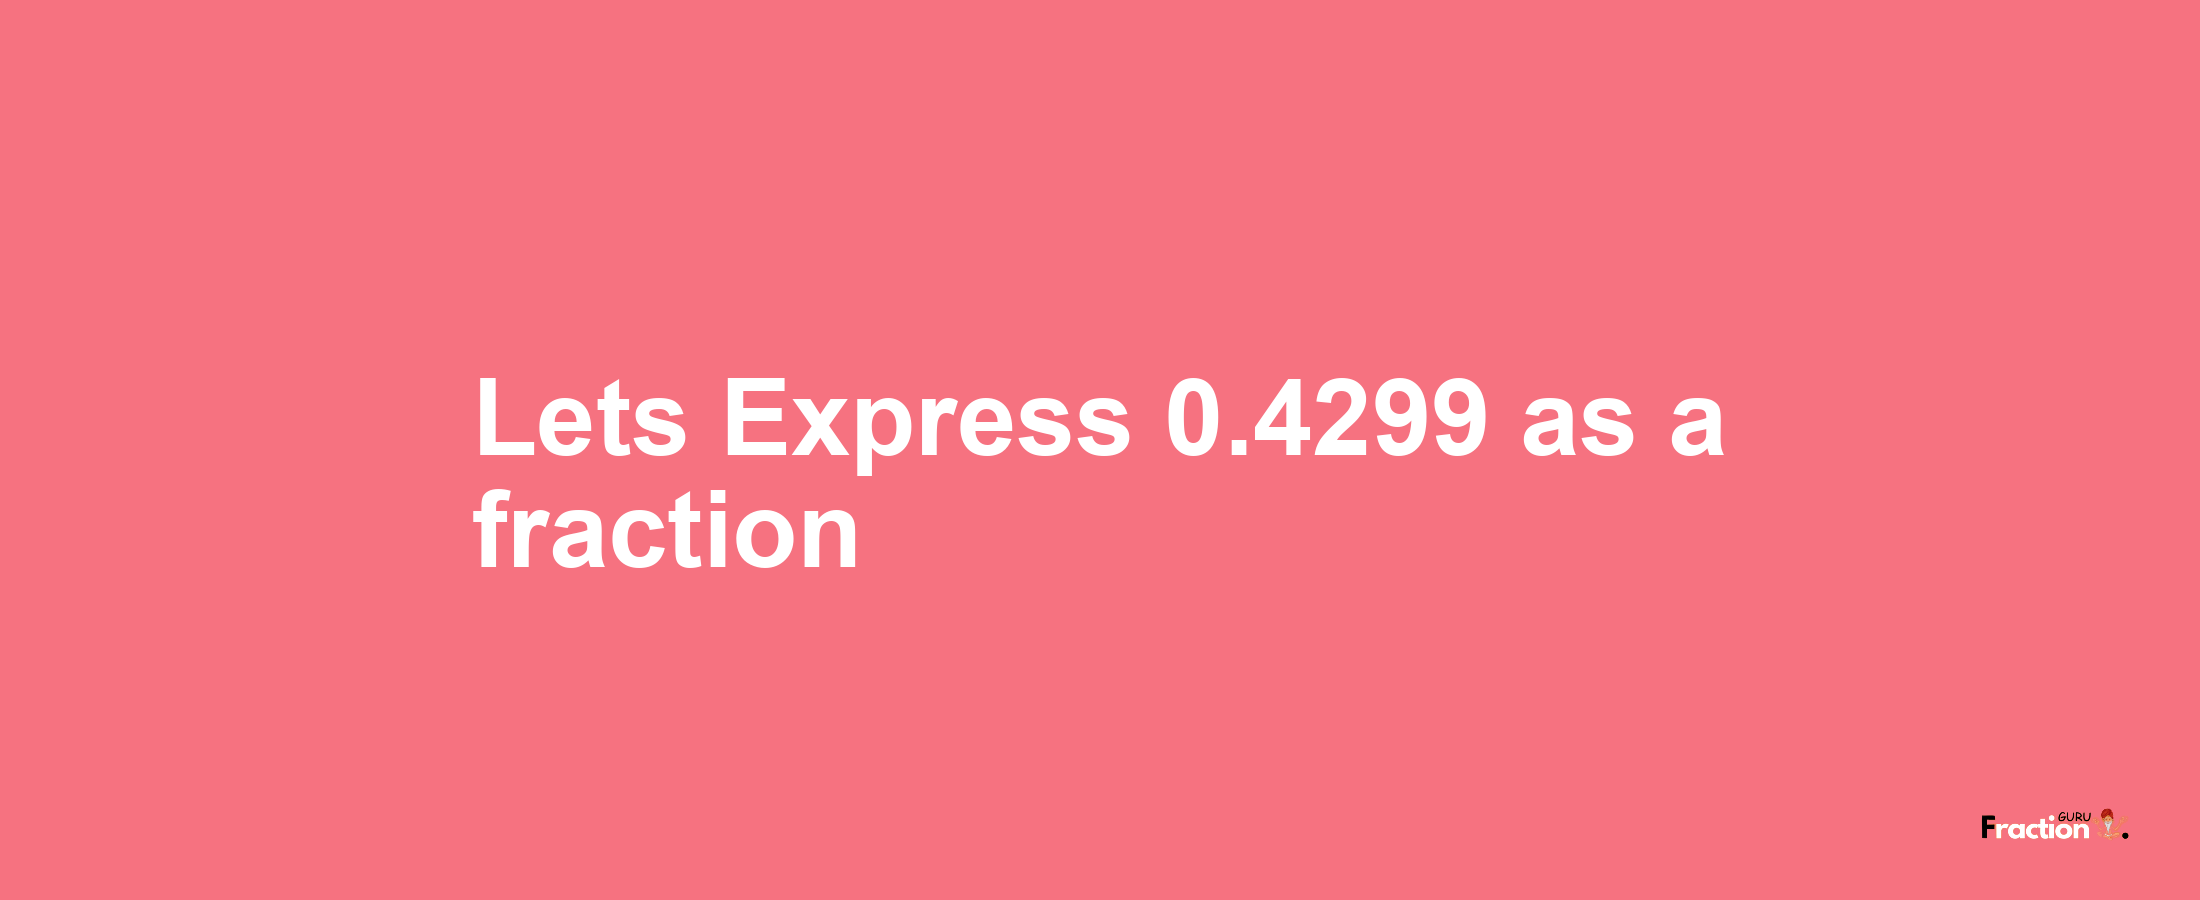 Lets Express 0.4299 as afraction